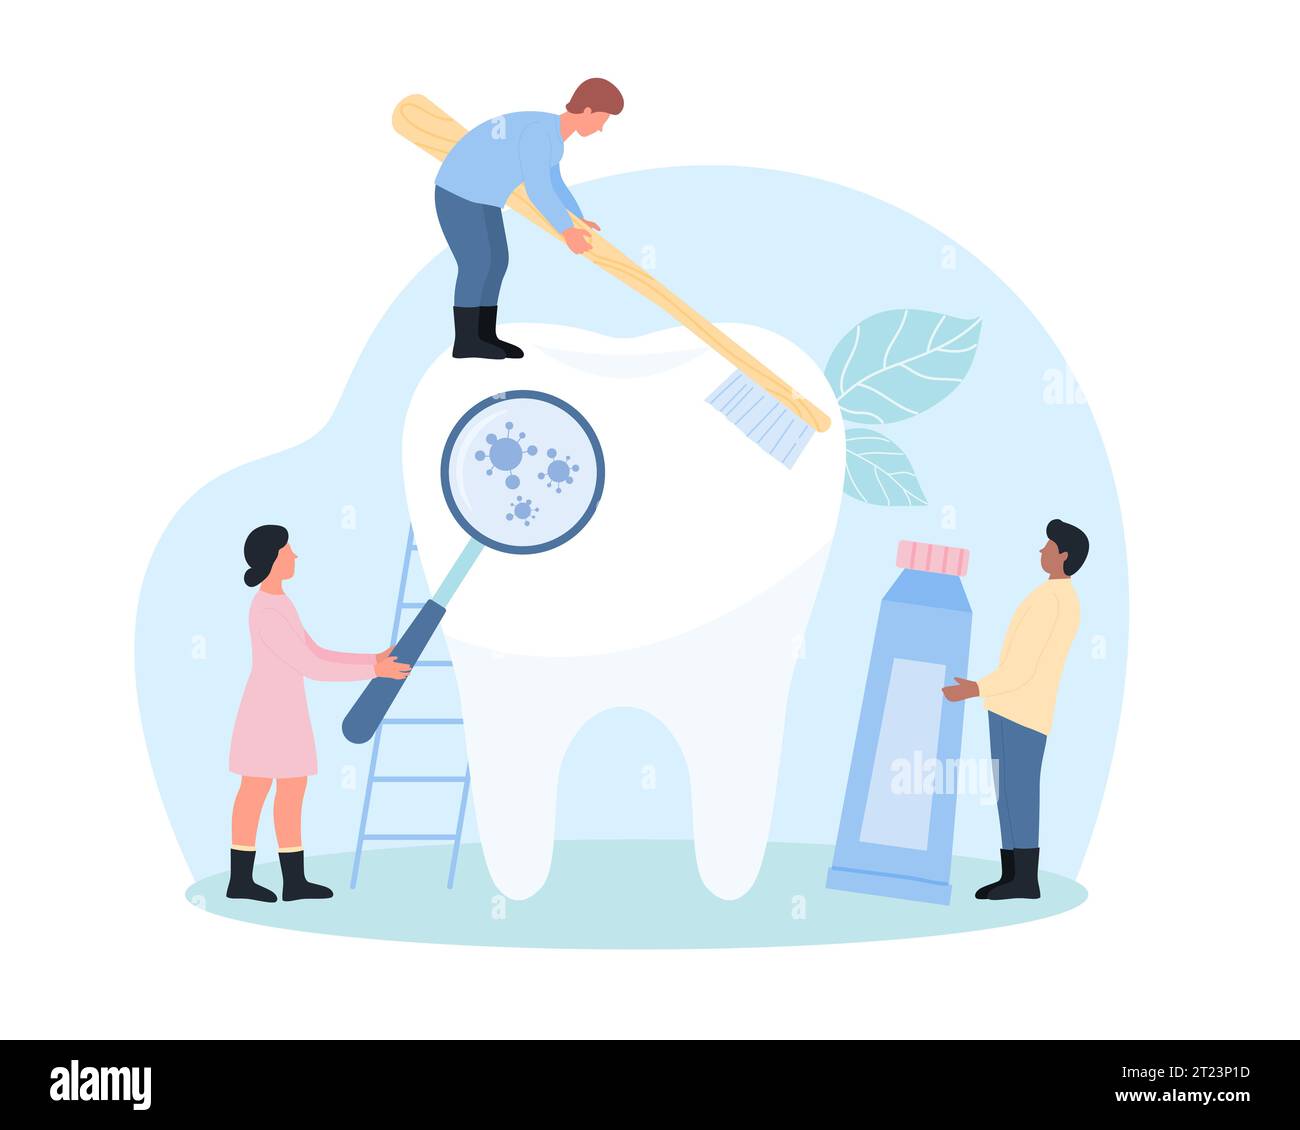 Teeth brushing, oral hygiene vector illustration. Cartoon tiny people holding toothbrush and healthy toothpaste to clean giant human tooth, woman examine dental germs in mouth under magnifying glass Stock Vector